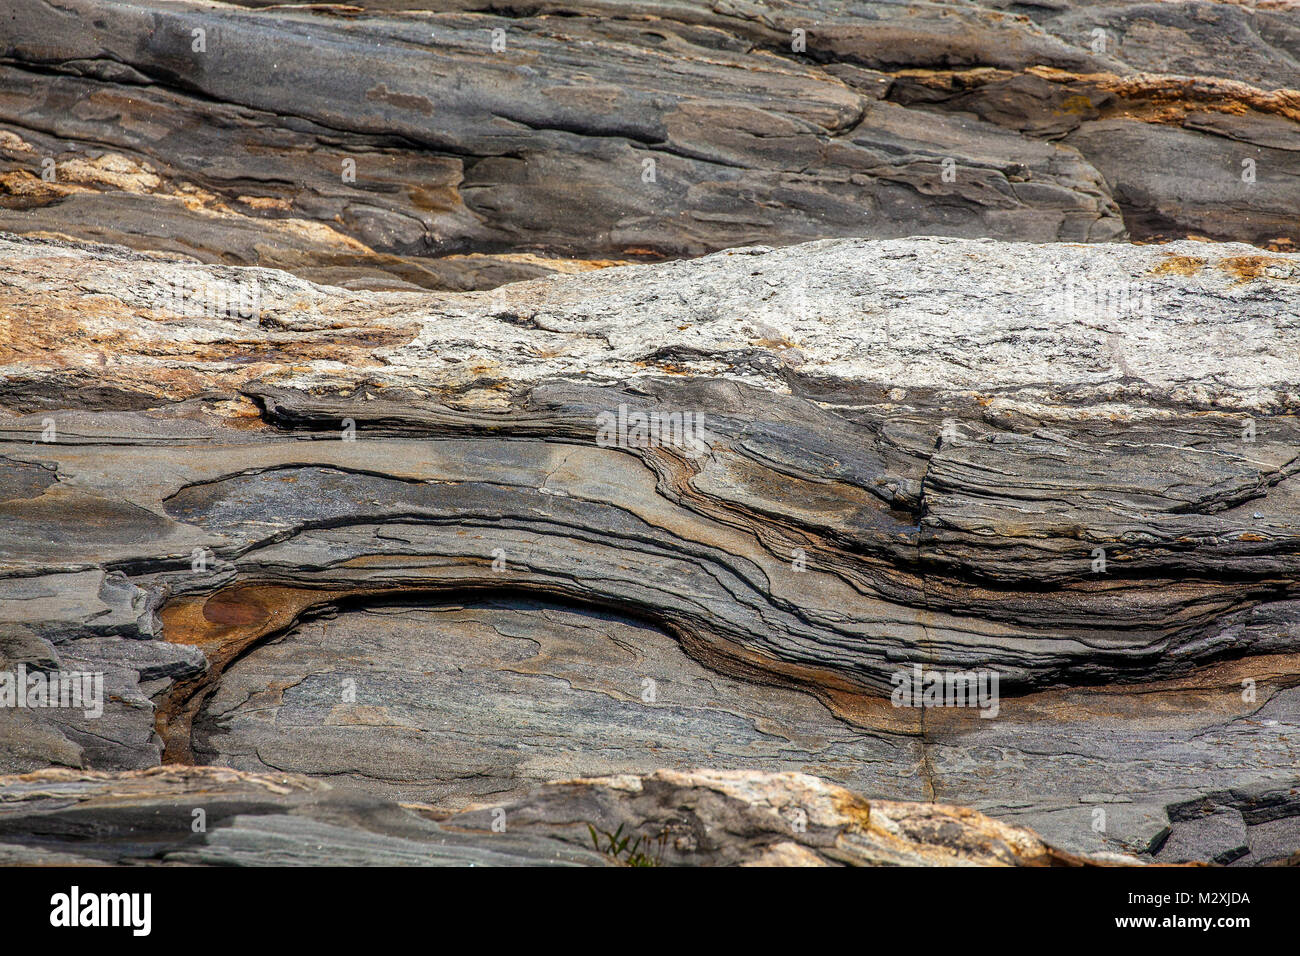 Layered bands of metamorphic rocks with quartz intrusions and crystals of quartzite and phylite and iron oxide at the coast of Maine at Camden, USA. Stock Photo